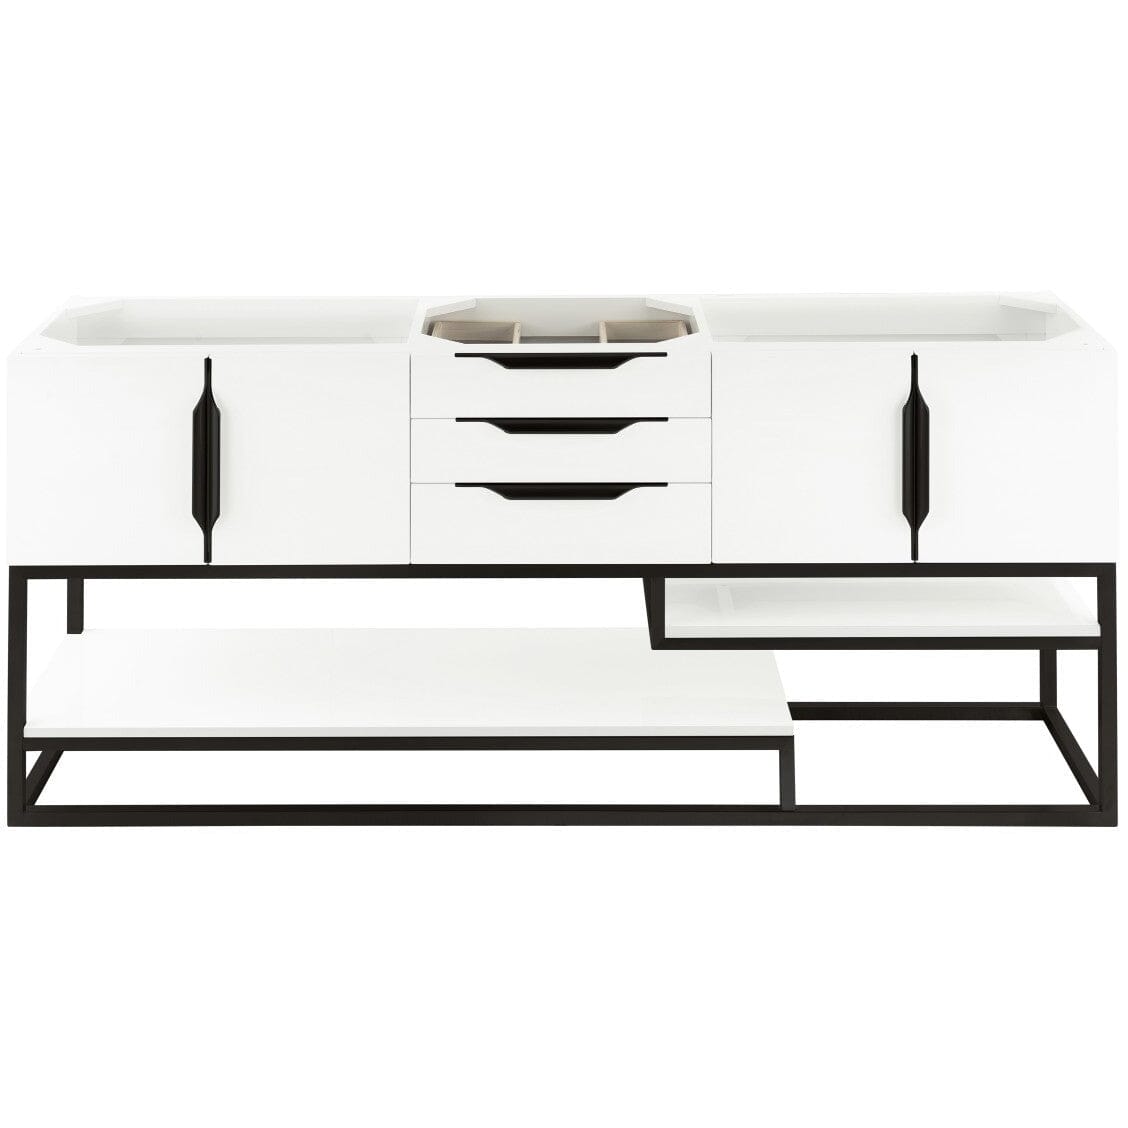 James Martin Columbia 72" Double Vanity Vanity James Martin Glossy White - Matte Black Cabinet Only 